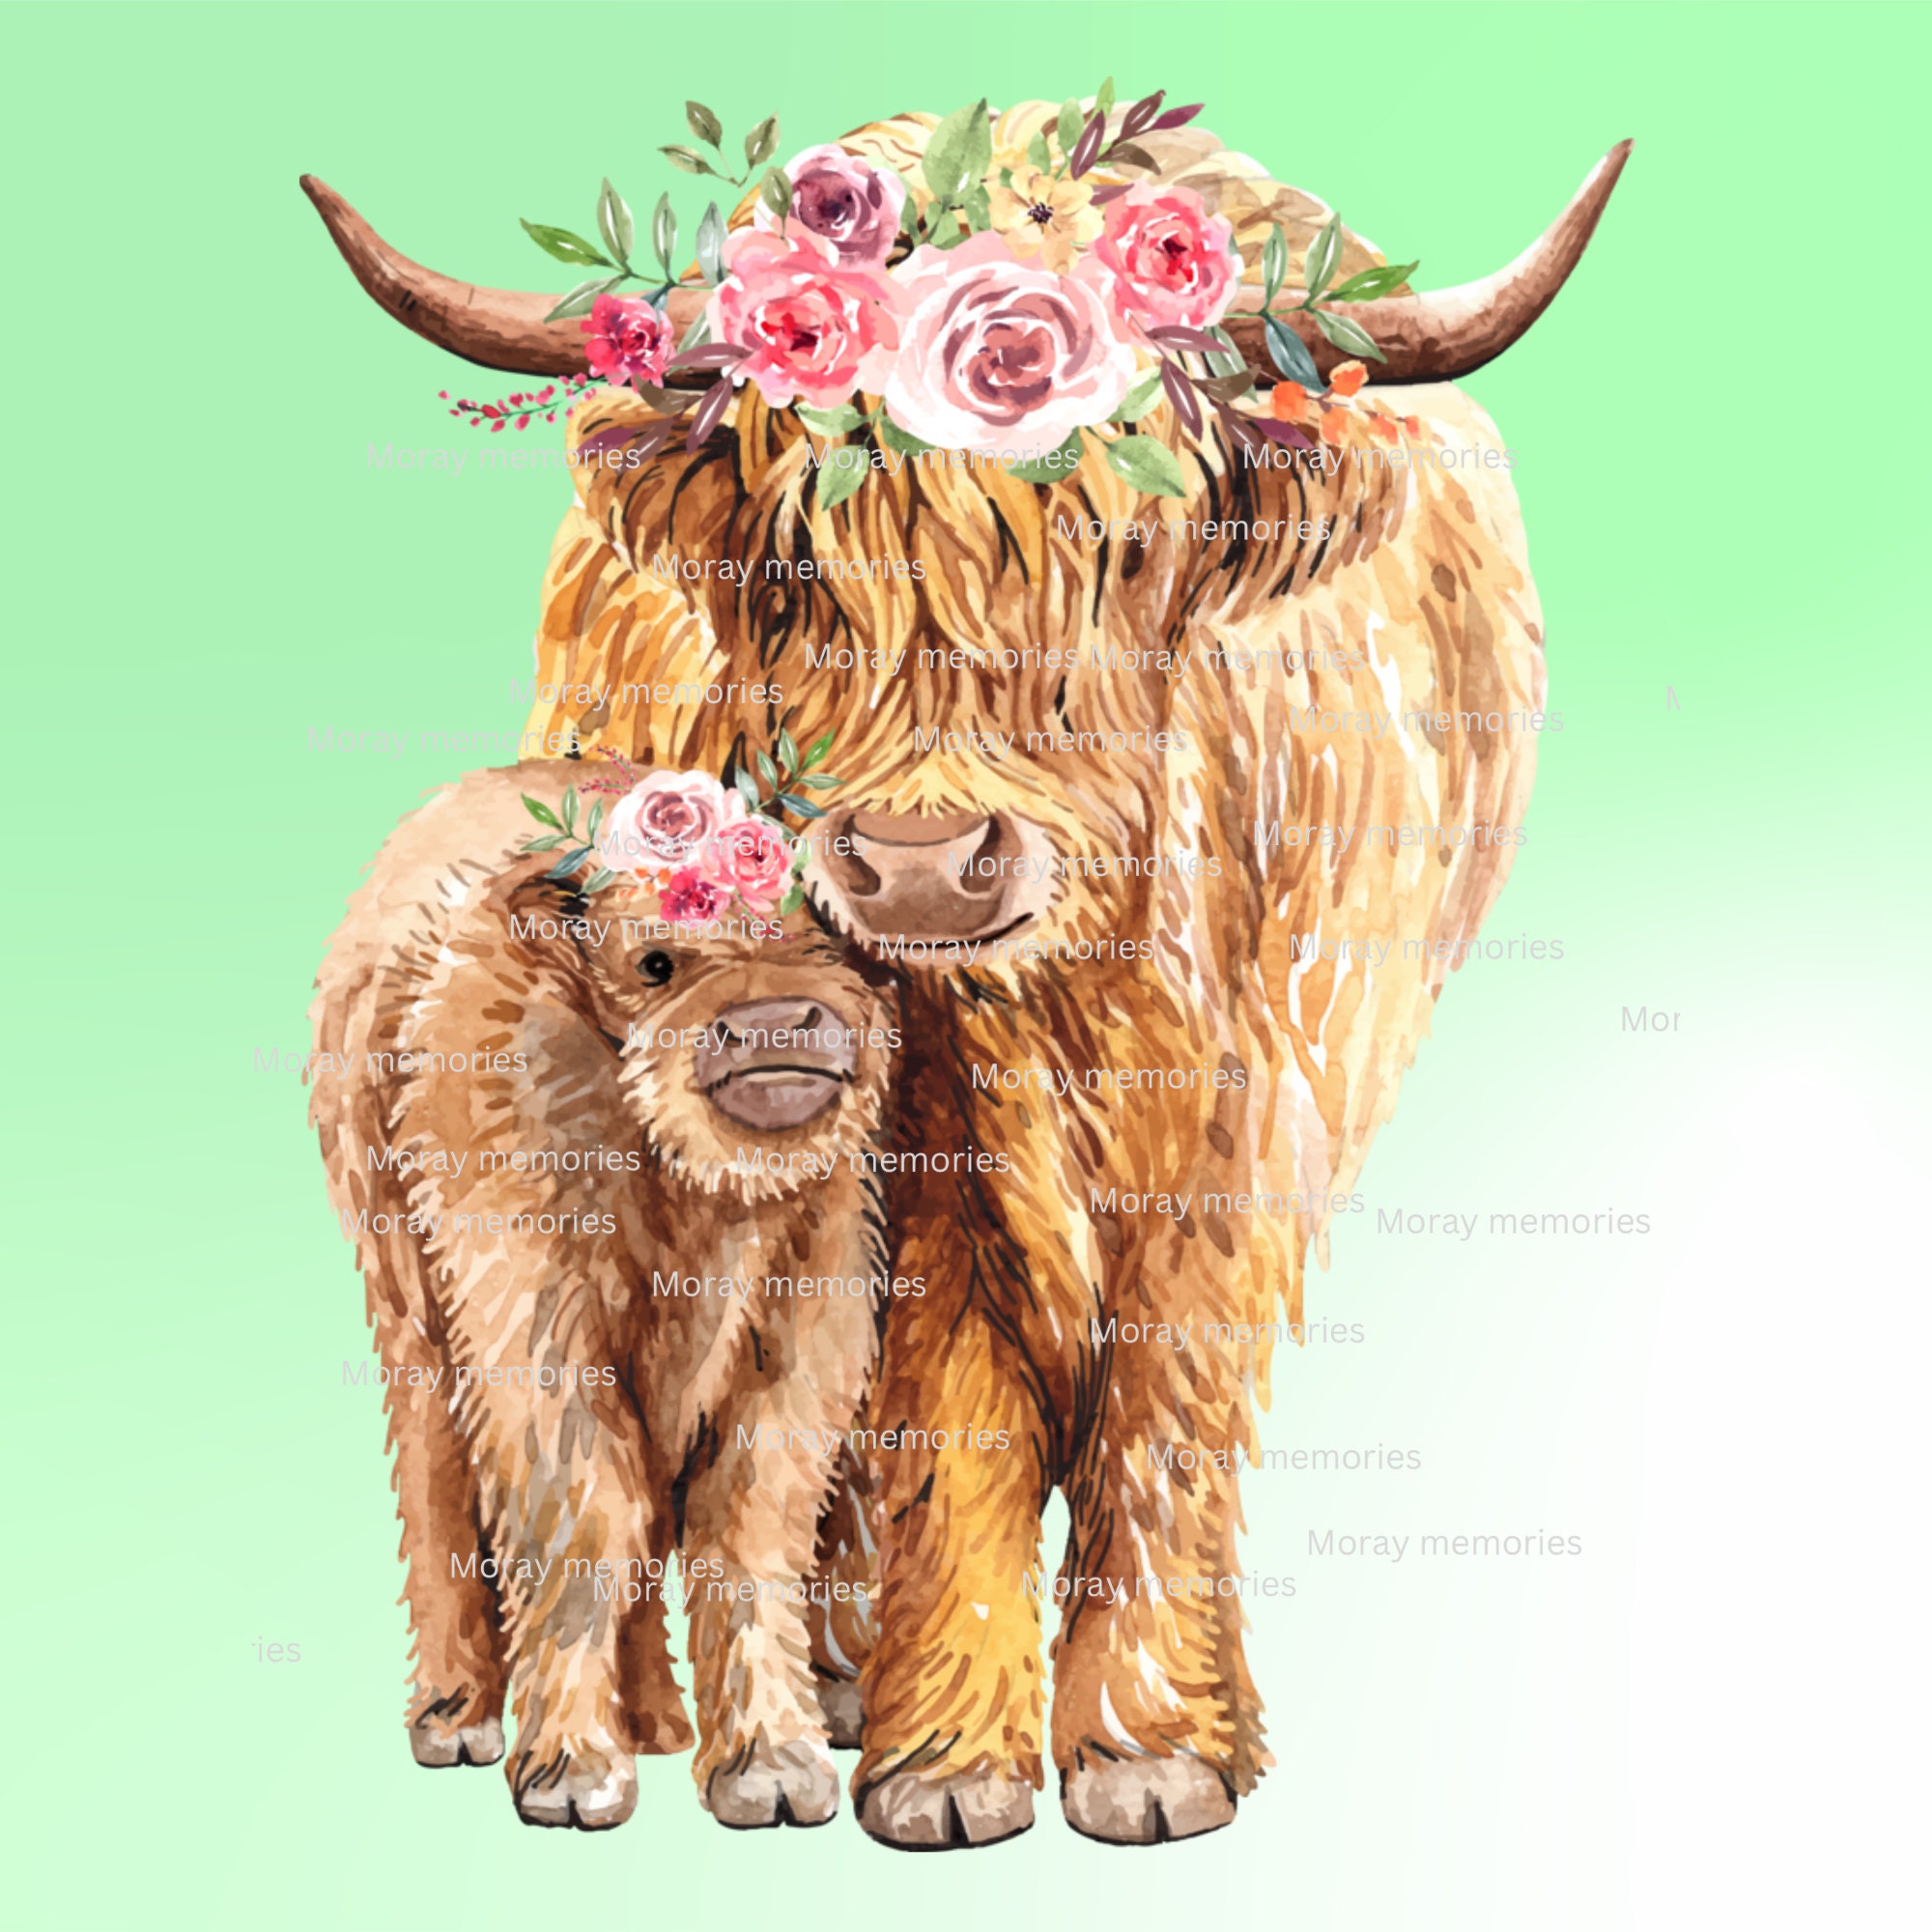 Aesthetic Abstract Highland Cattle - Diamond Painting